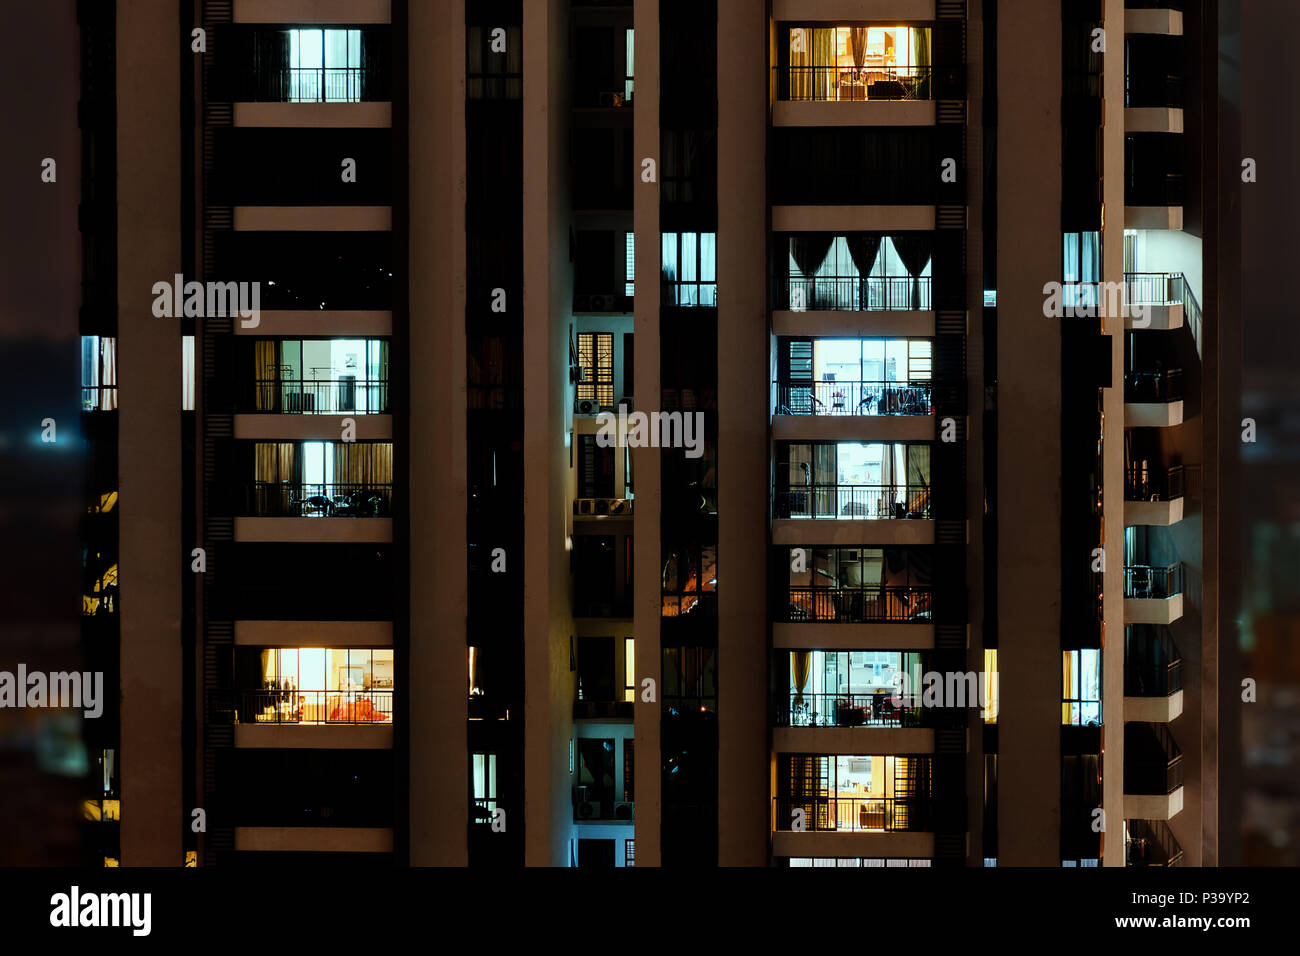 Night scene in big city - front view of high-rise building with windows of apartments in which light is burning. Stock Photo